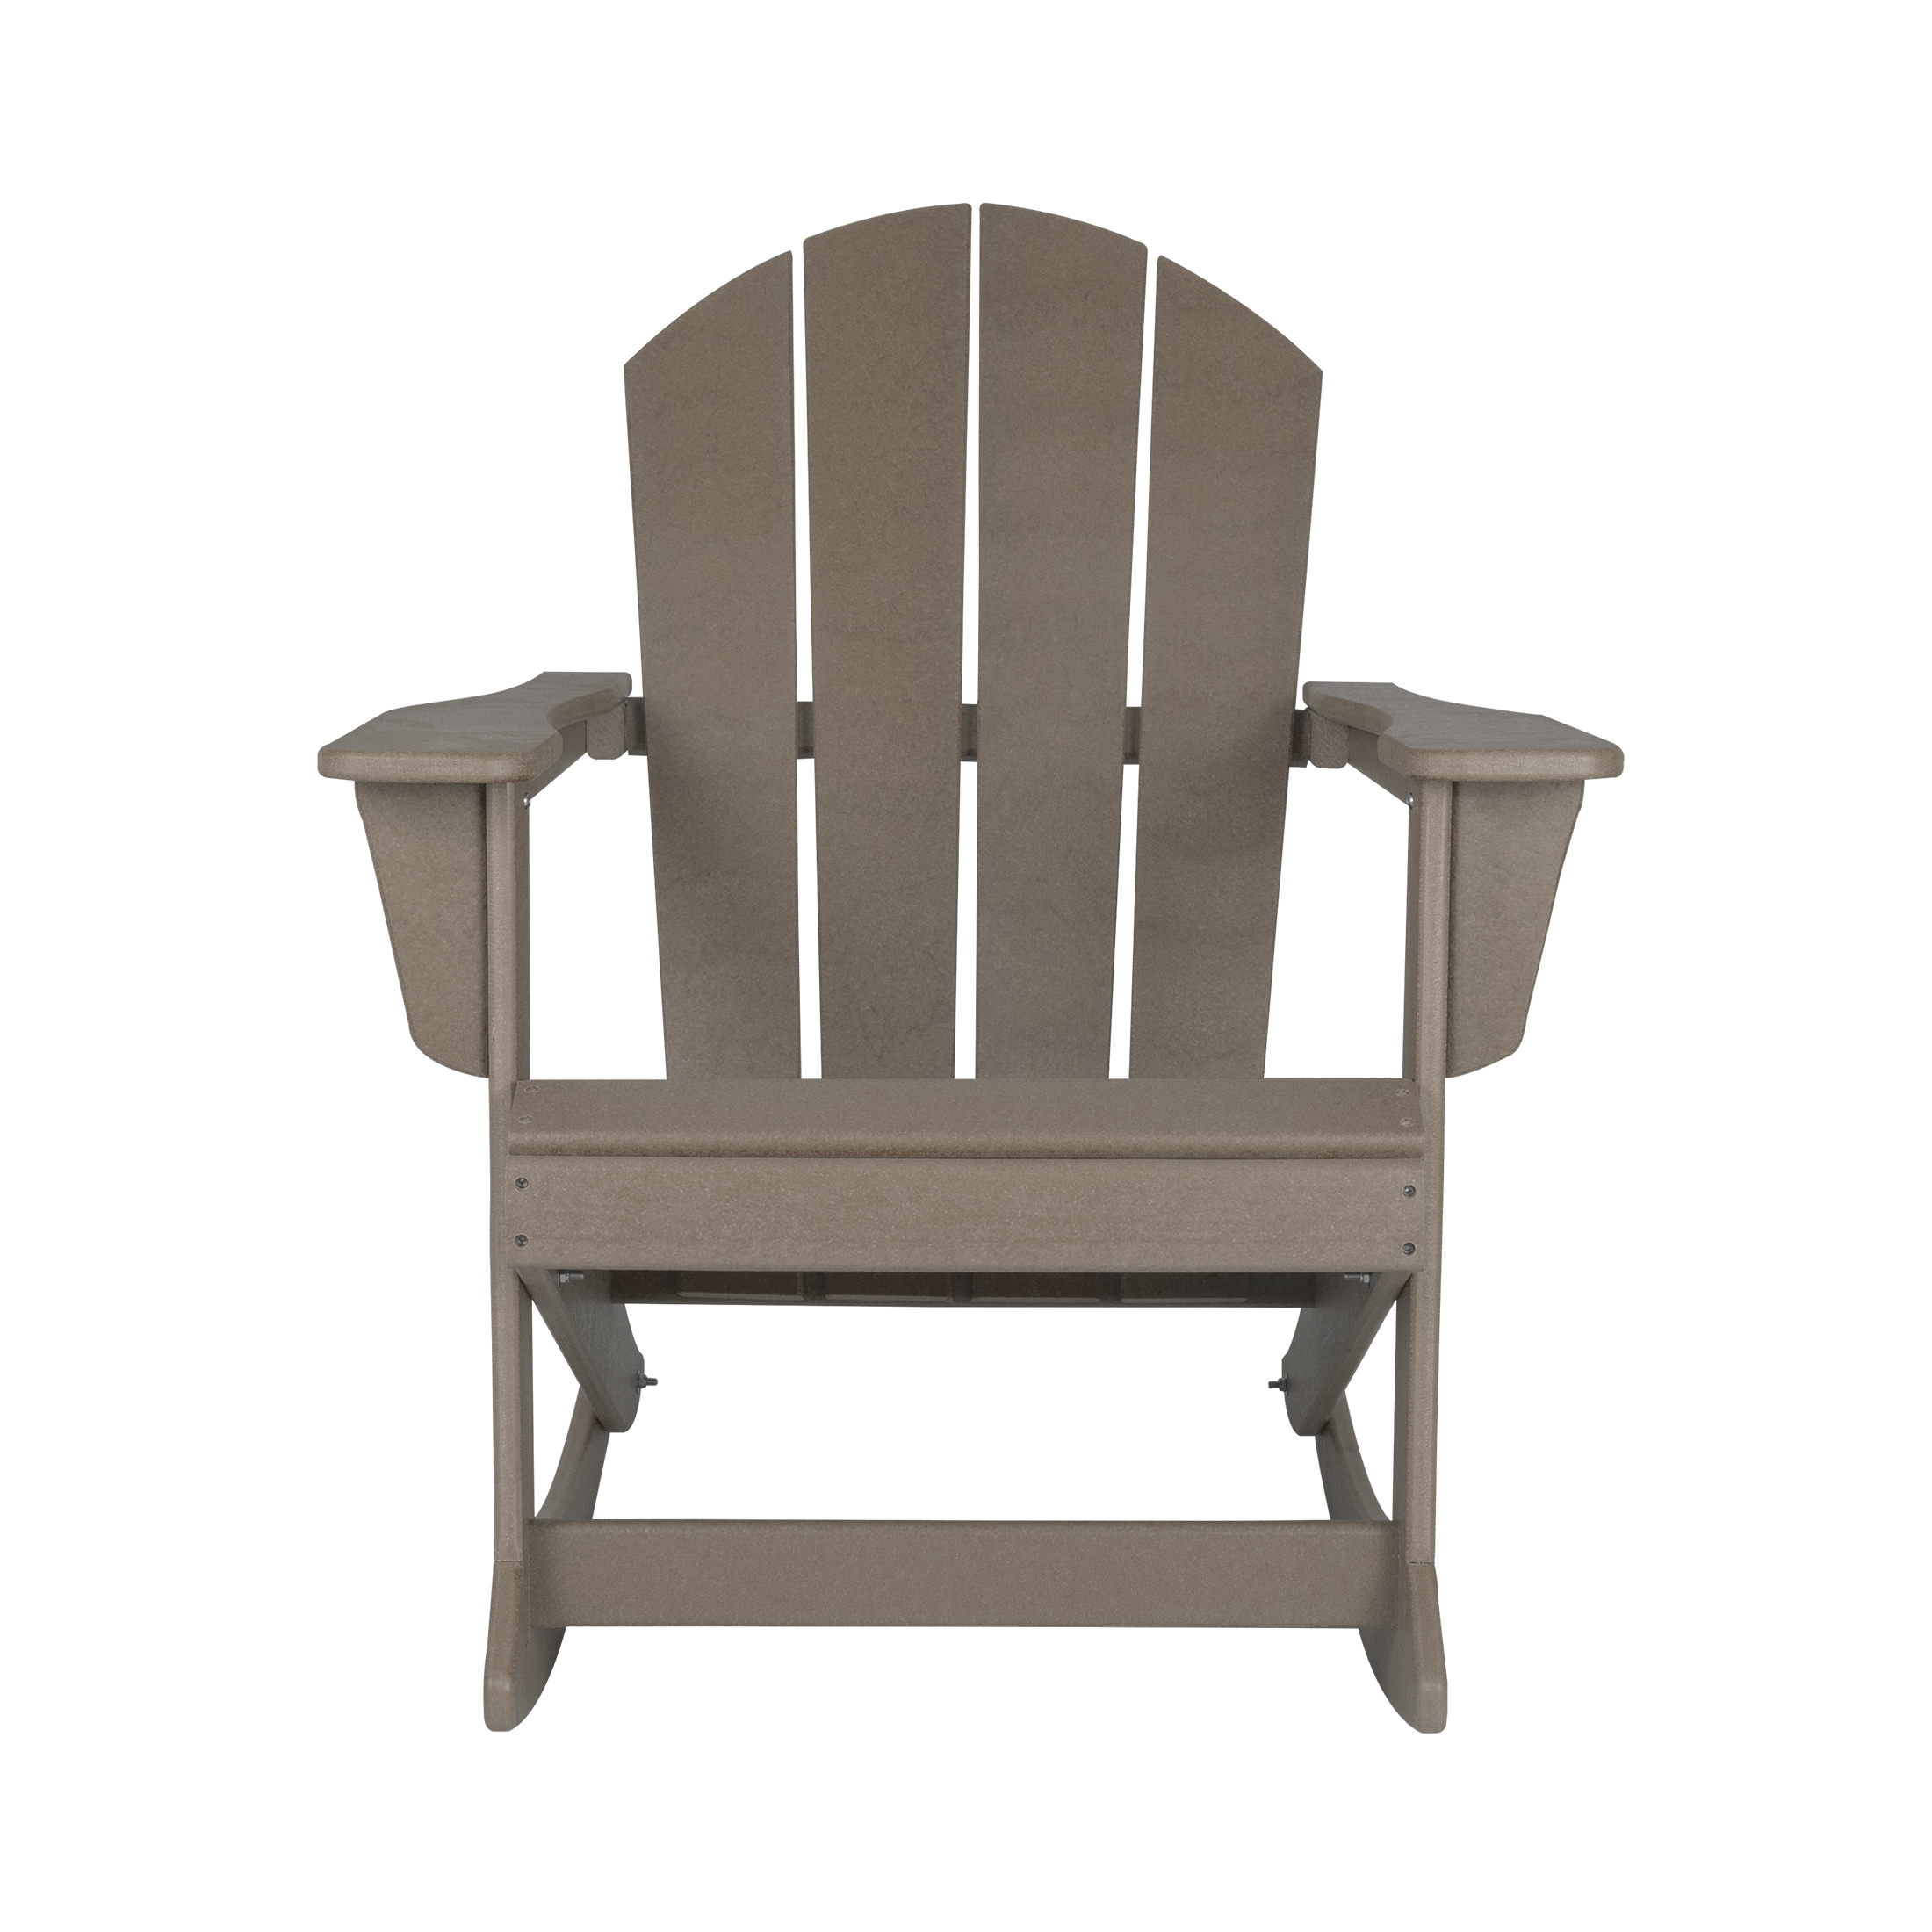 GARDEN Plastic Adirondack Rocking Chair for Outdoor Patio Porch Seating, Weathered Wood - image 2 of 7